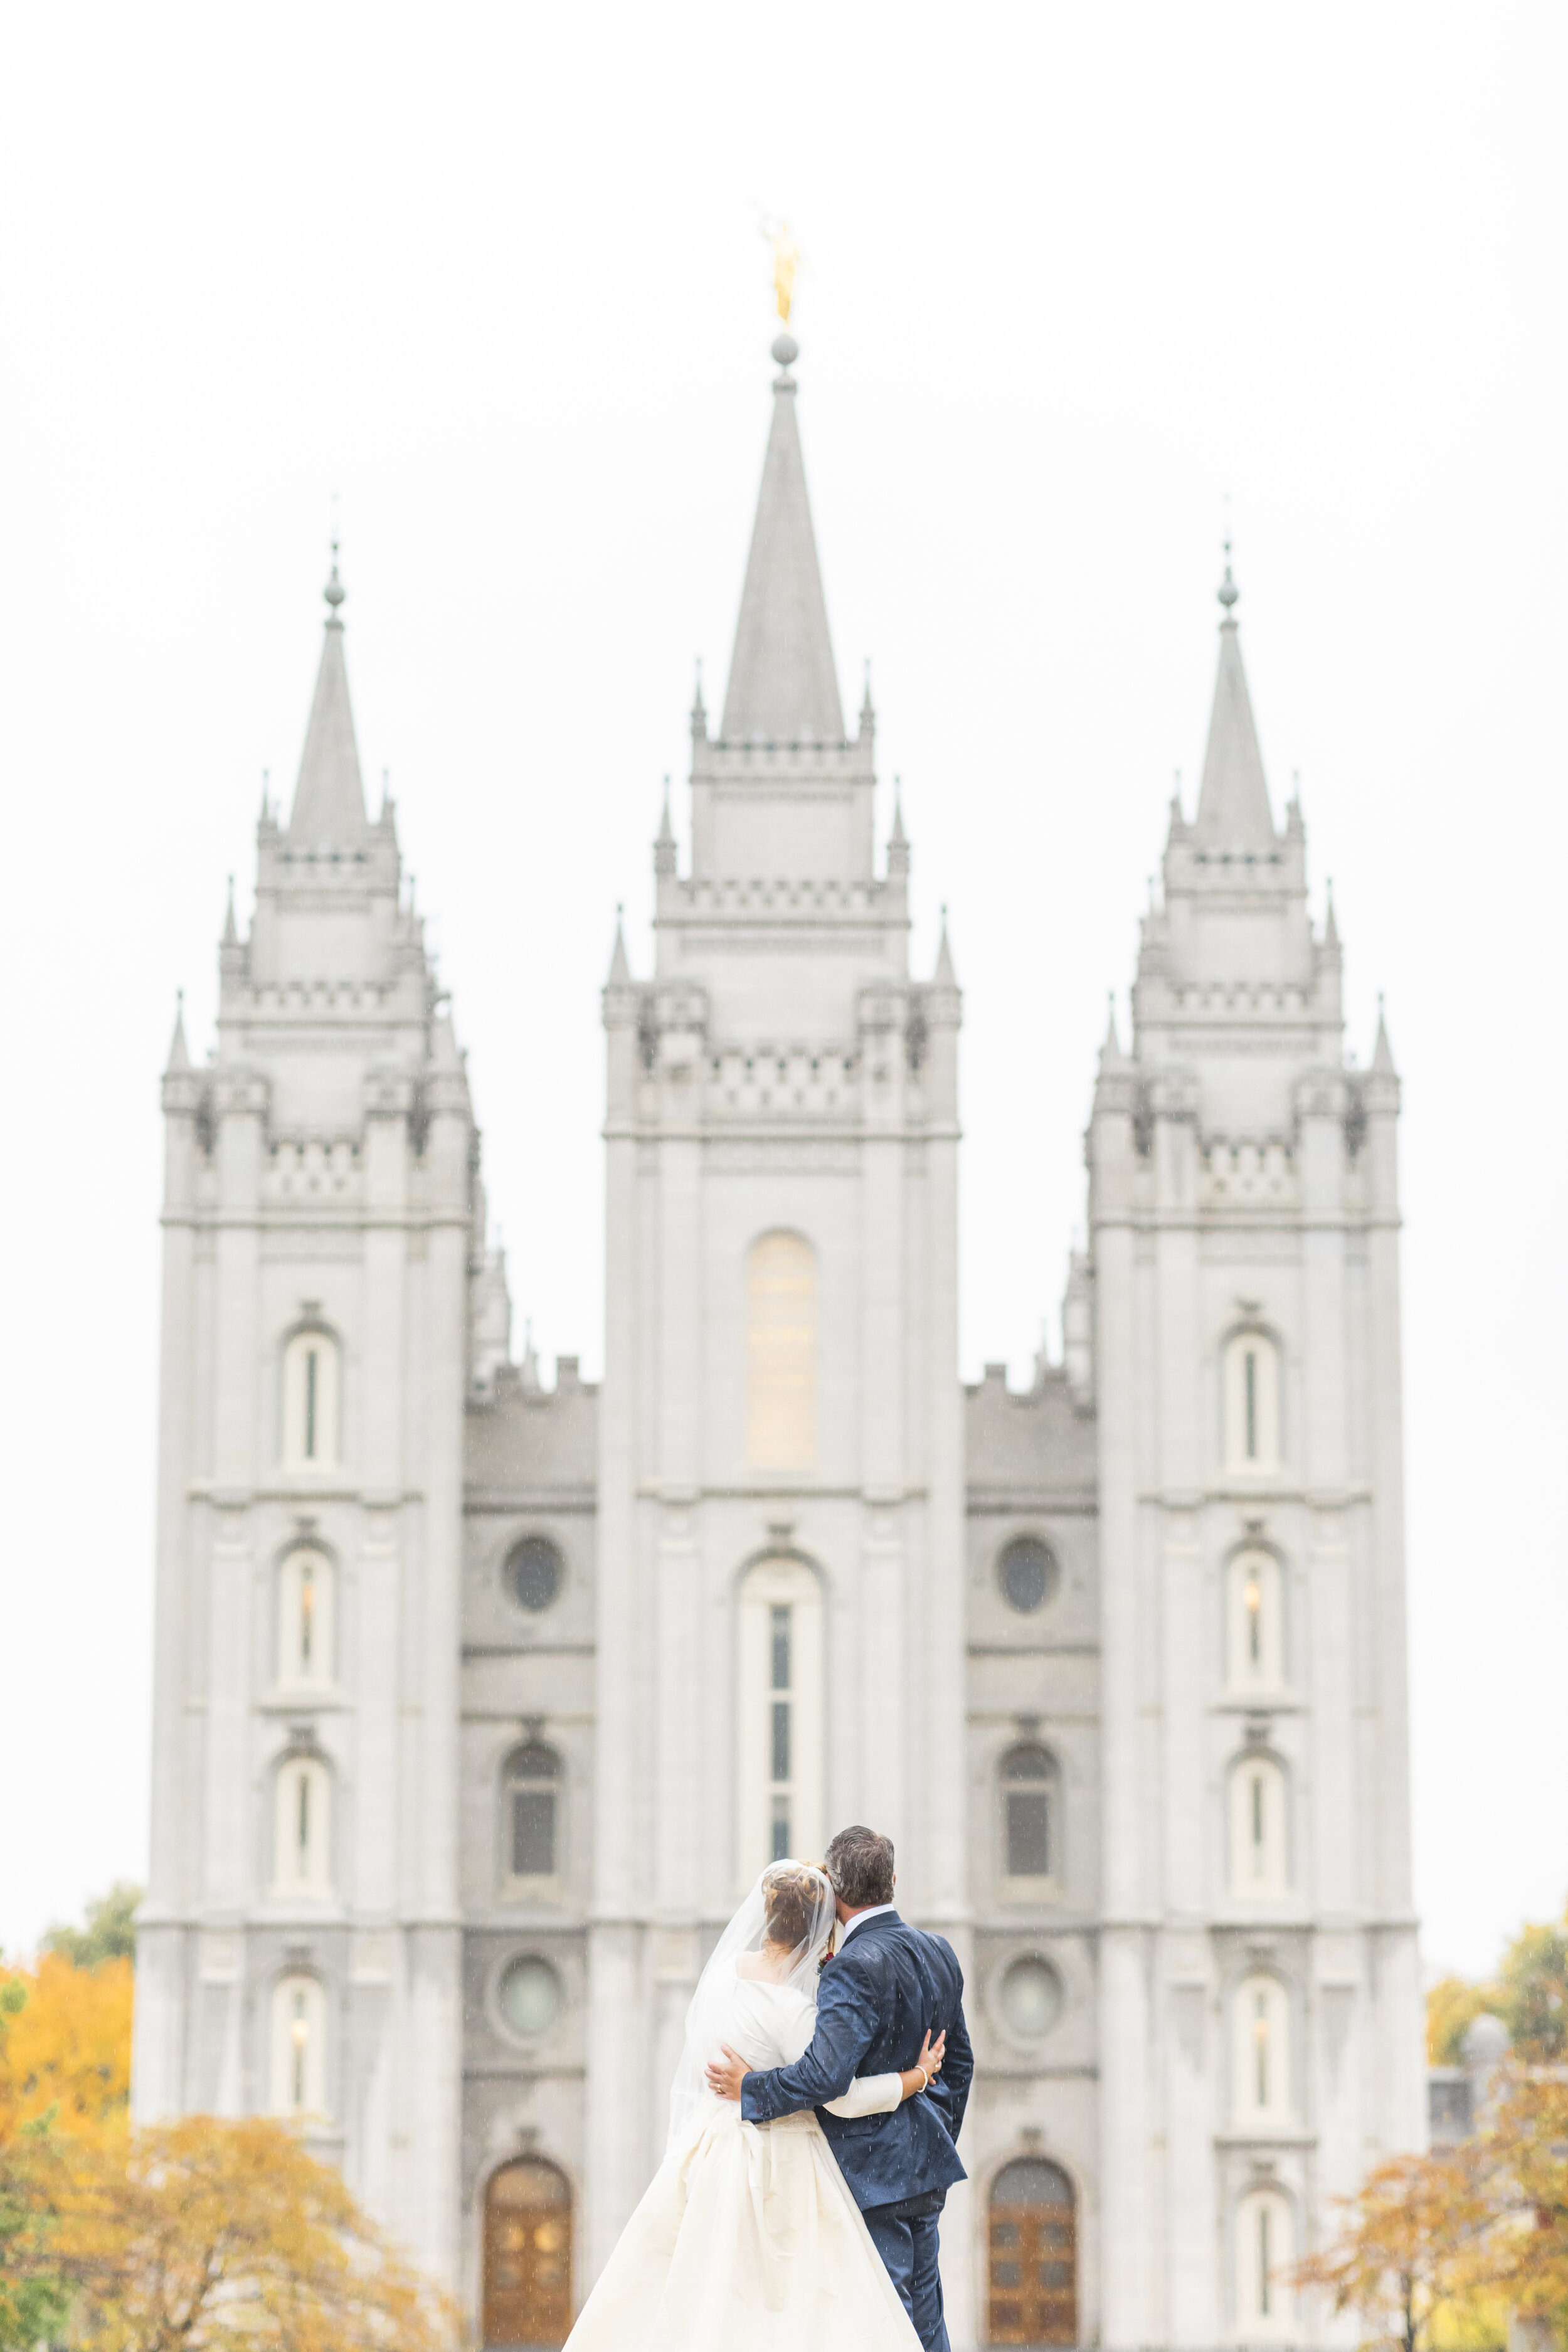  salt lake lds temple skyline yellow leaves rainy fall wedding day bride and groom hugging eyes to the temple just married temple square professional utah valley wedding photographer #saltlakeldstemple #saltlakecityutah #templesquare #sealing #justma